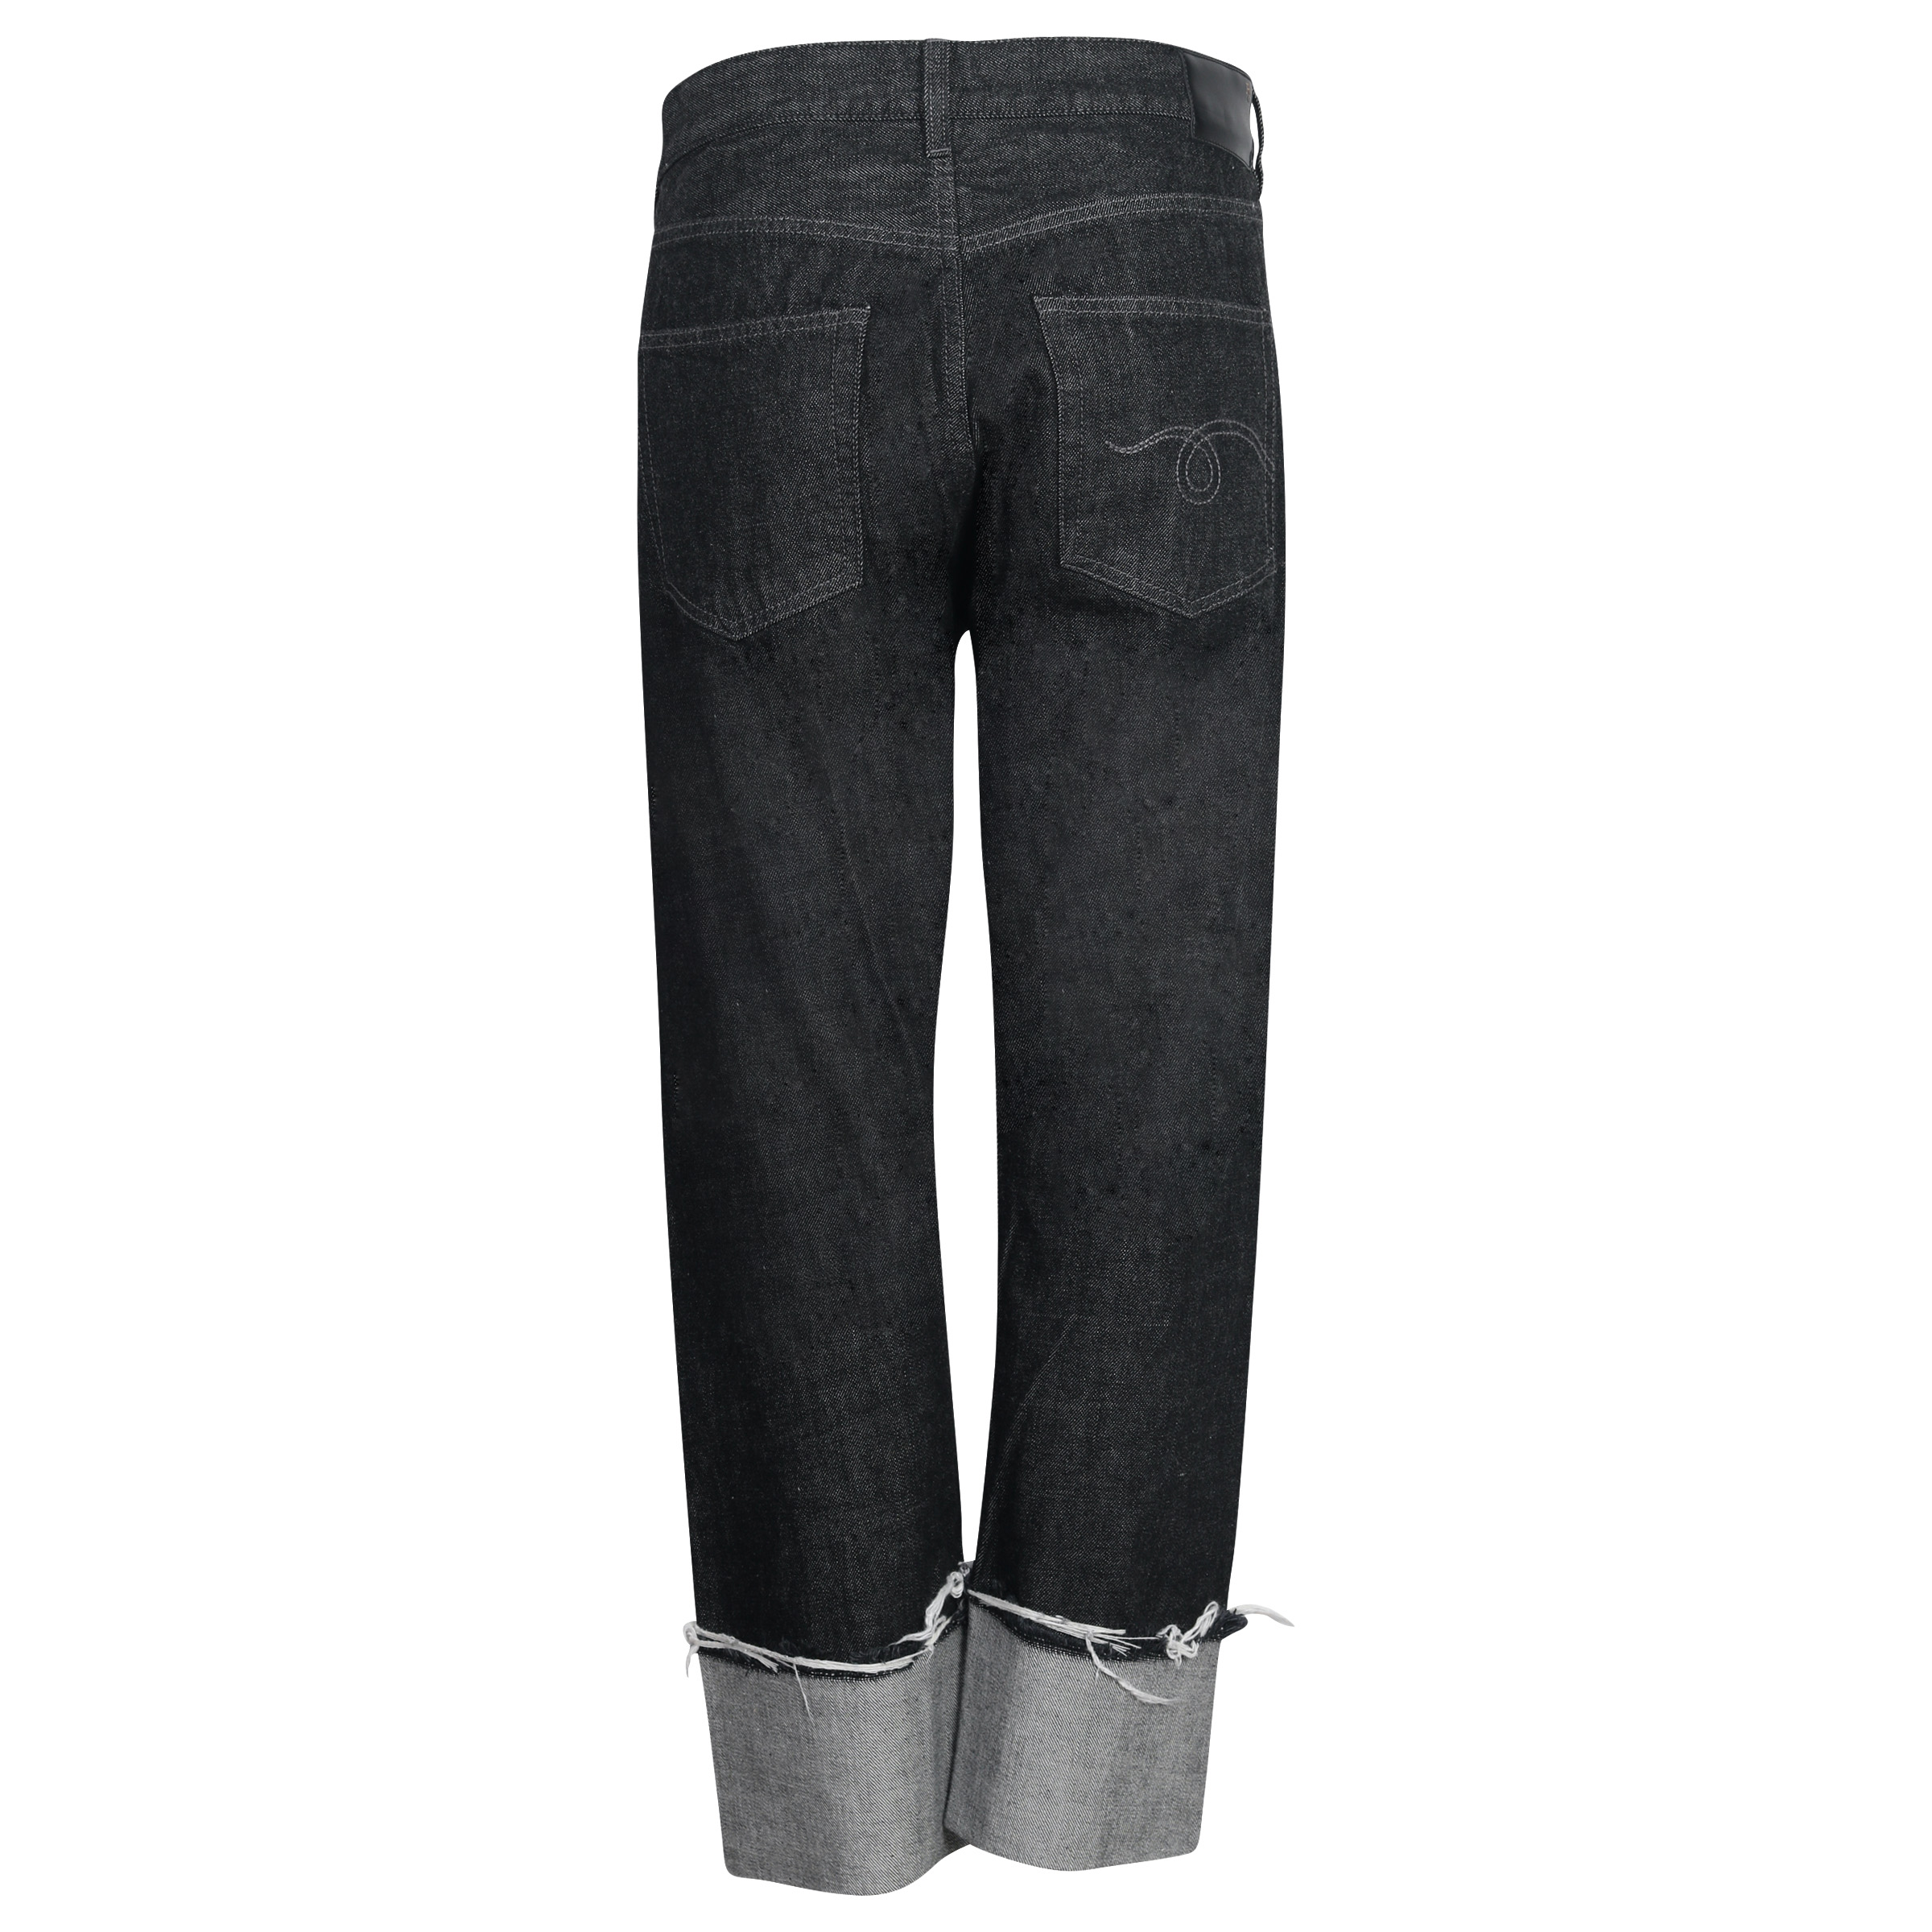 R13 Cross Over Jeans with Cuff in Black 30